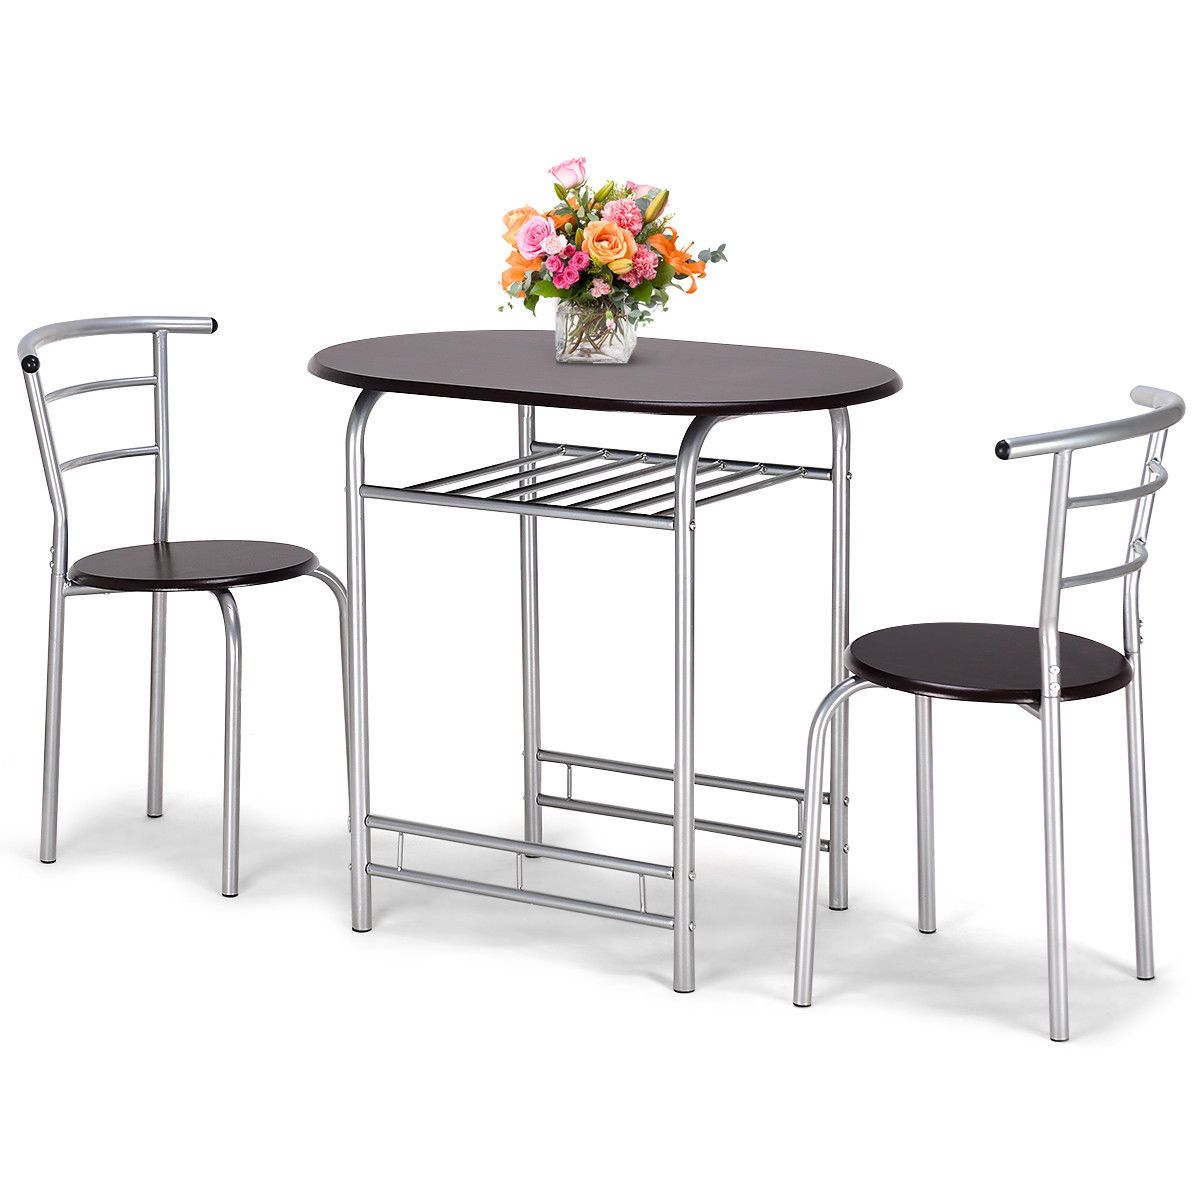 Lelia 3 Piece Breakfast Nook Dining Set Pertaining To Newest Mitzel 3 Piece Dining Sets (View 15 of 20)